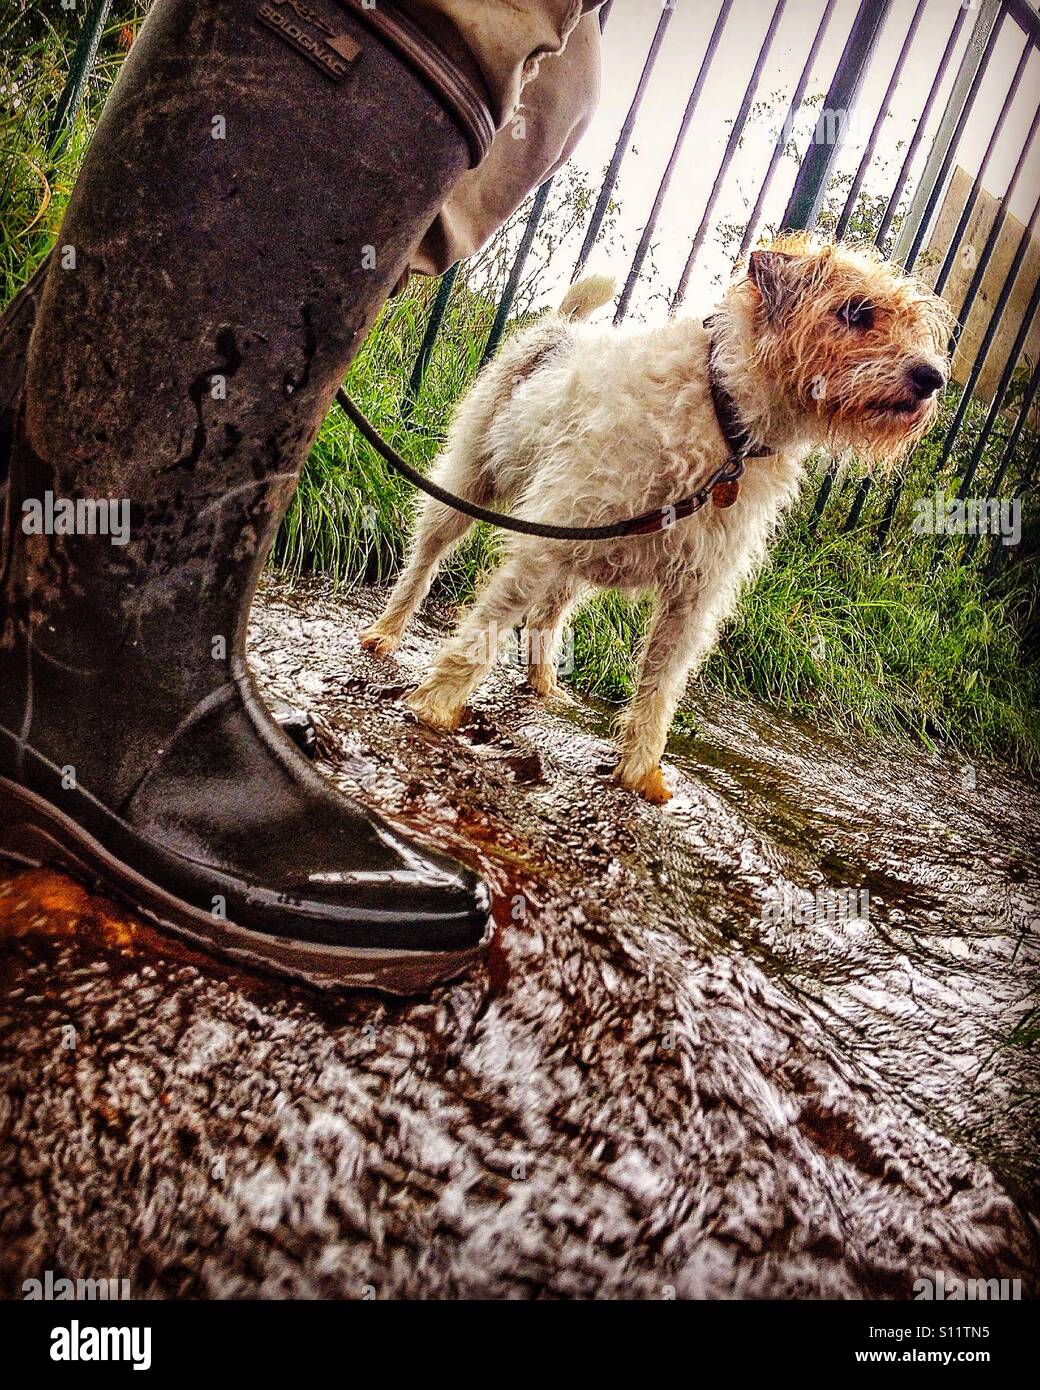 Dog and owner standing in fast flowing rainwater Stock Photo